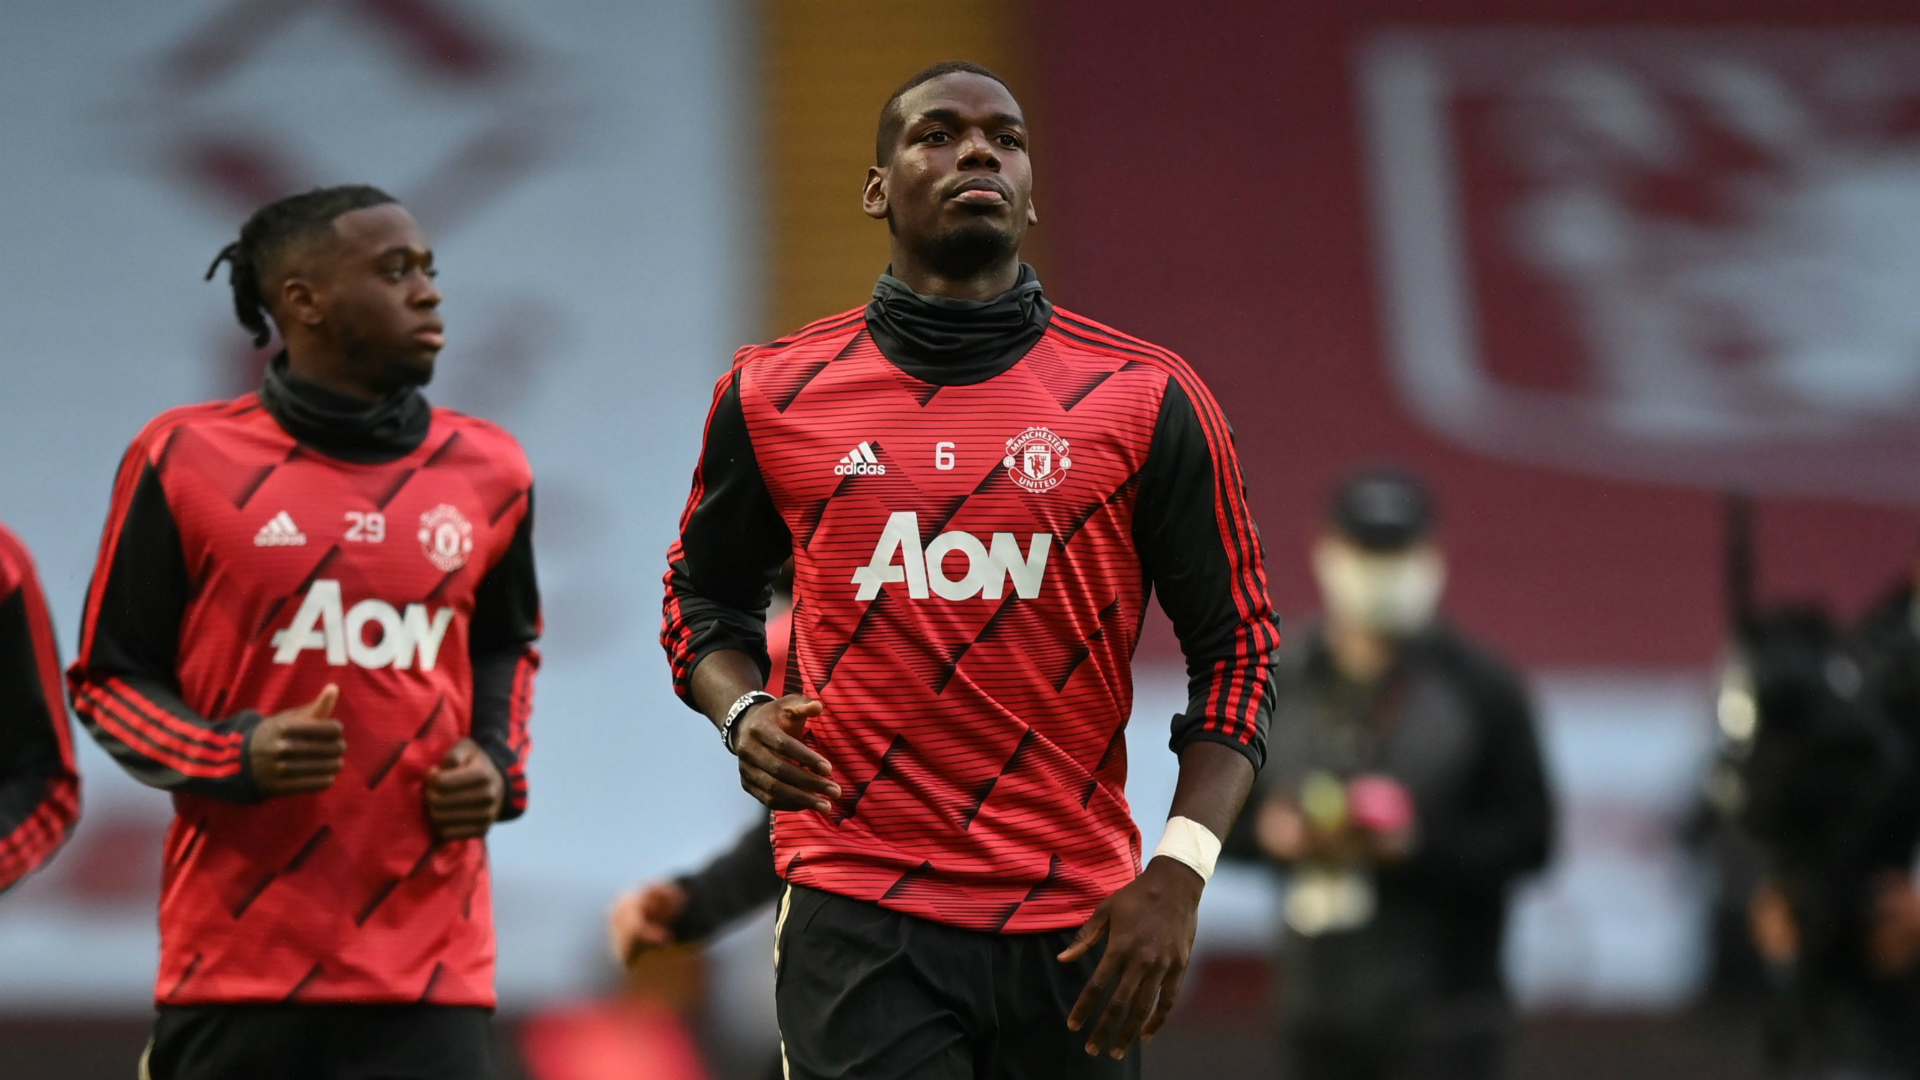 Paul Pogba is thriving in an ideal role alongside Bruno Fernandes, according to their fellow Manchester United midfielder Nemanja Matic.